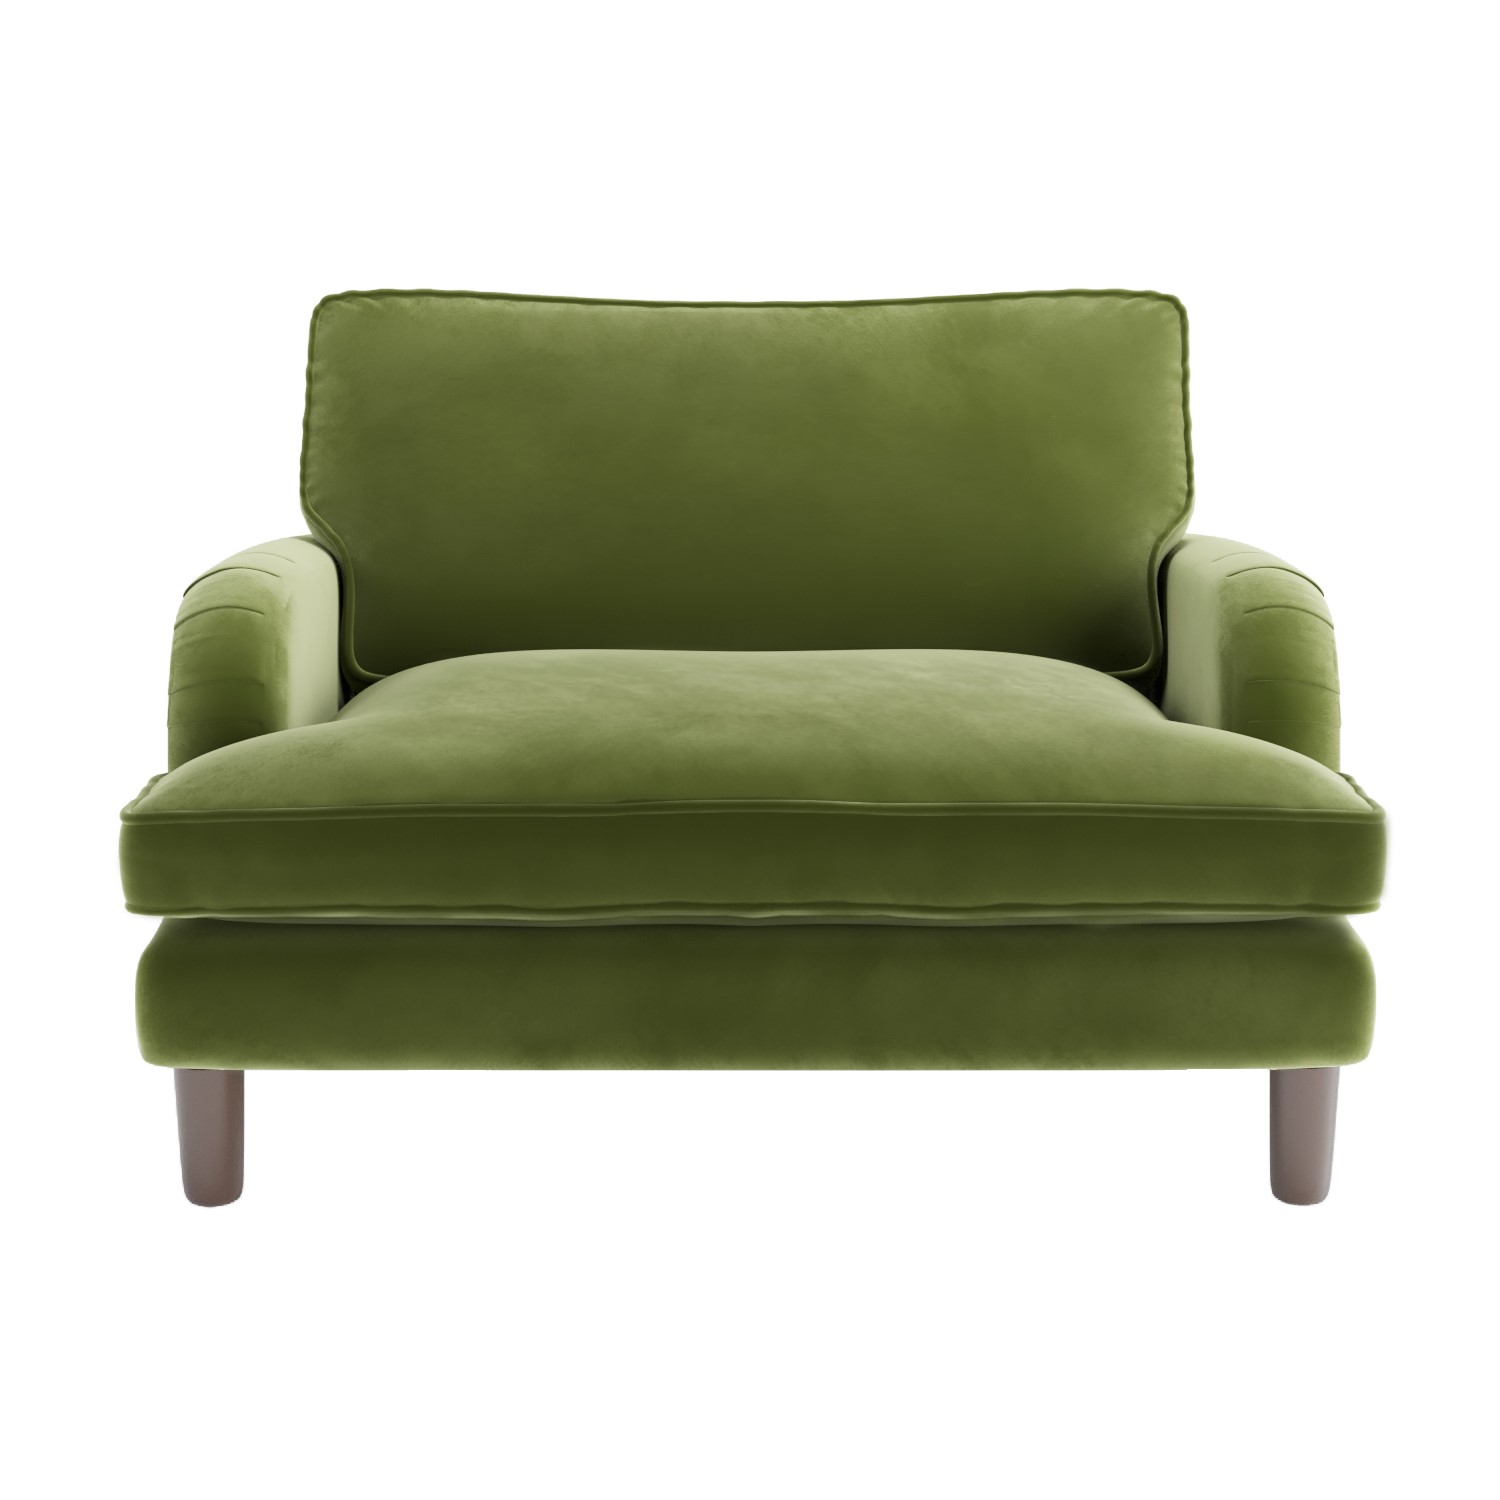 Read more about Pet sofa bed in olive green velvet suitable for dogs & cats